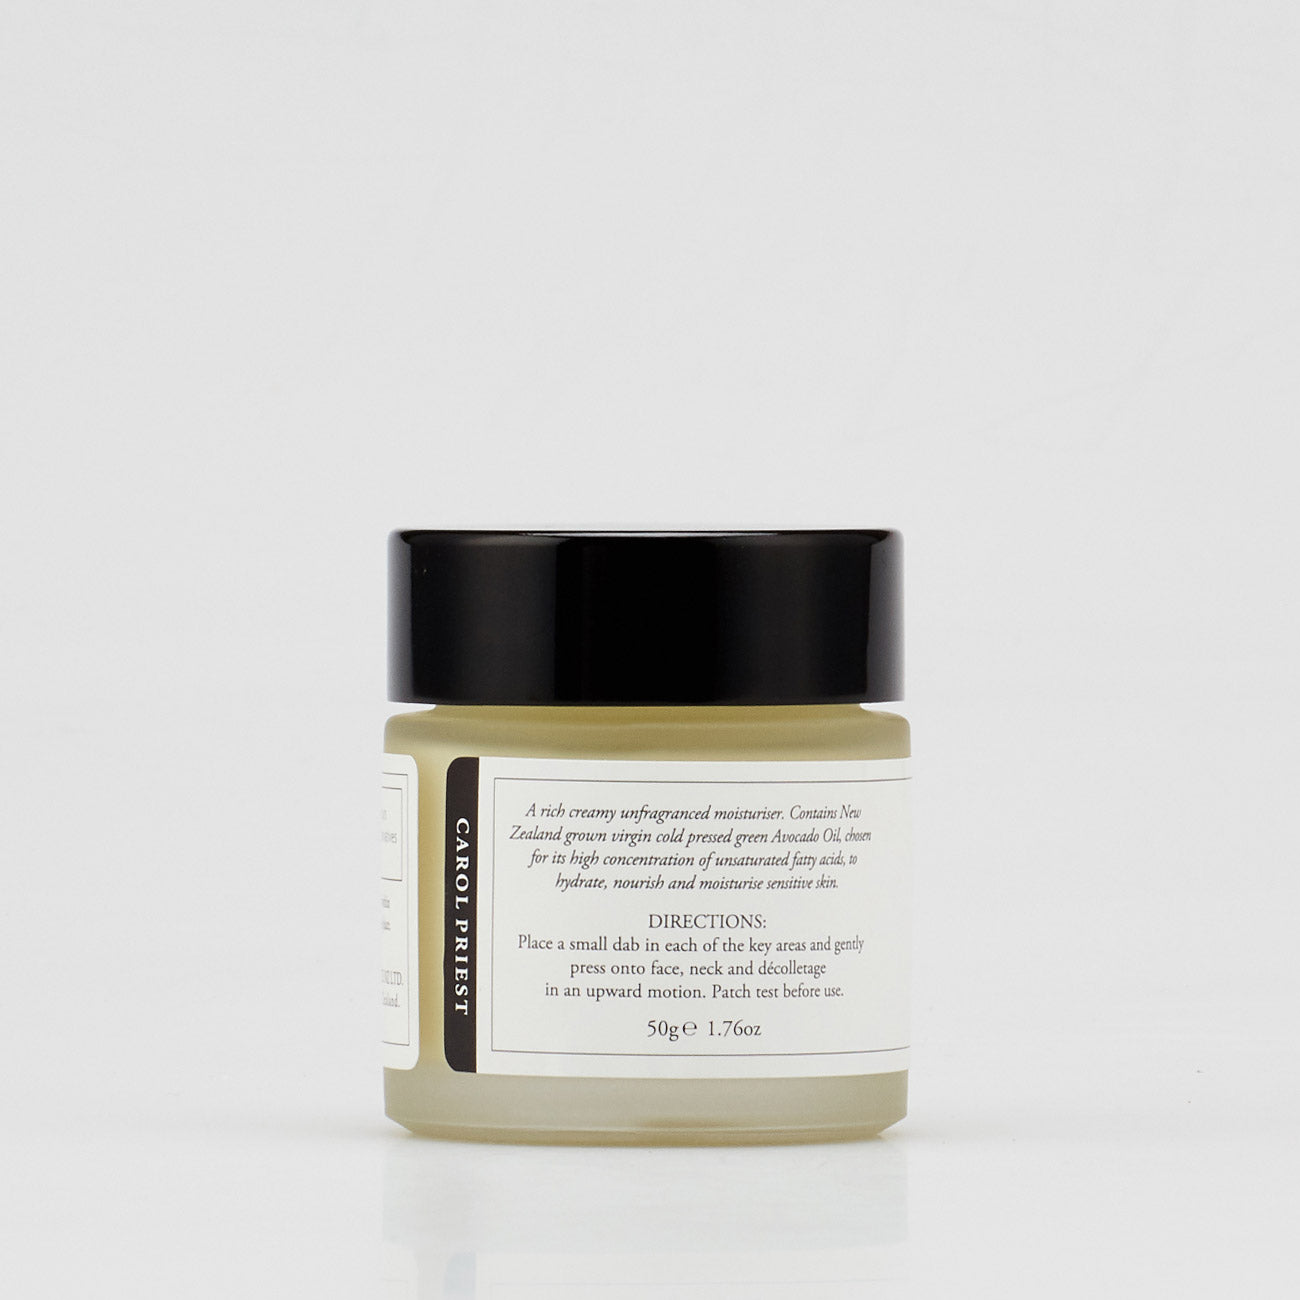 Representation of Avocado Fruit Moisture Cream, a hydrating product from Carol Priest's line of natural, organic cosmetics.